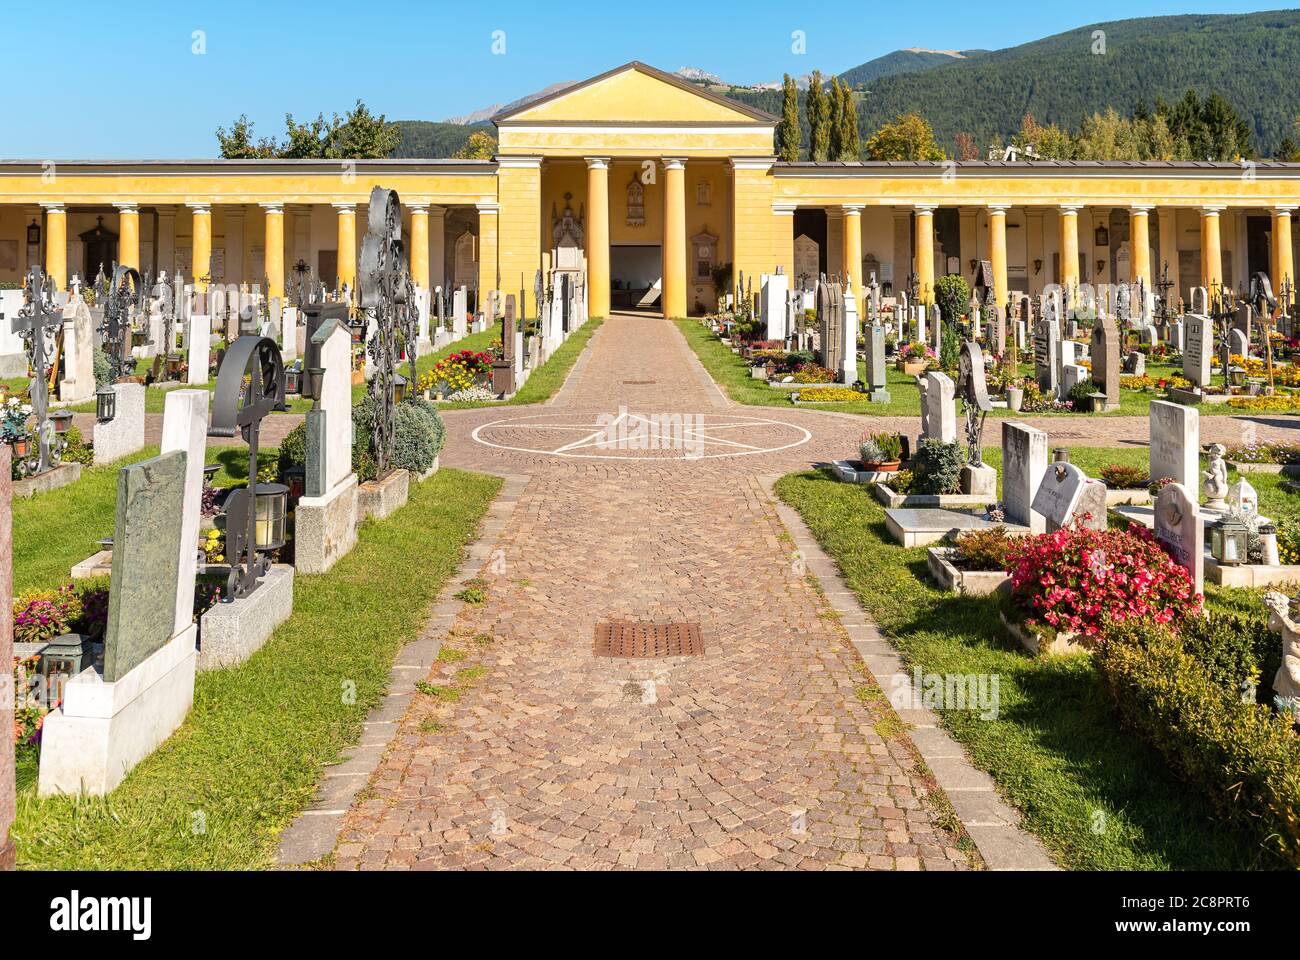 Bruneck - Brunico, South Tyrol, Italy - October 12, 2019: Brunico War Cemetery, known as the Austro-Hungarian Cemetery to commemorate the victims of t Stock Photo